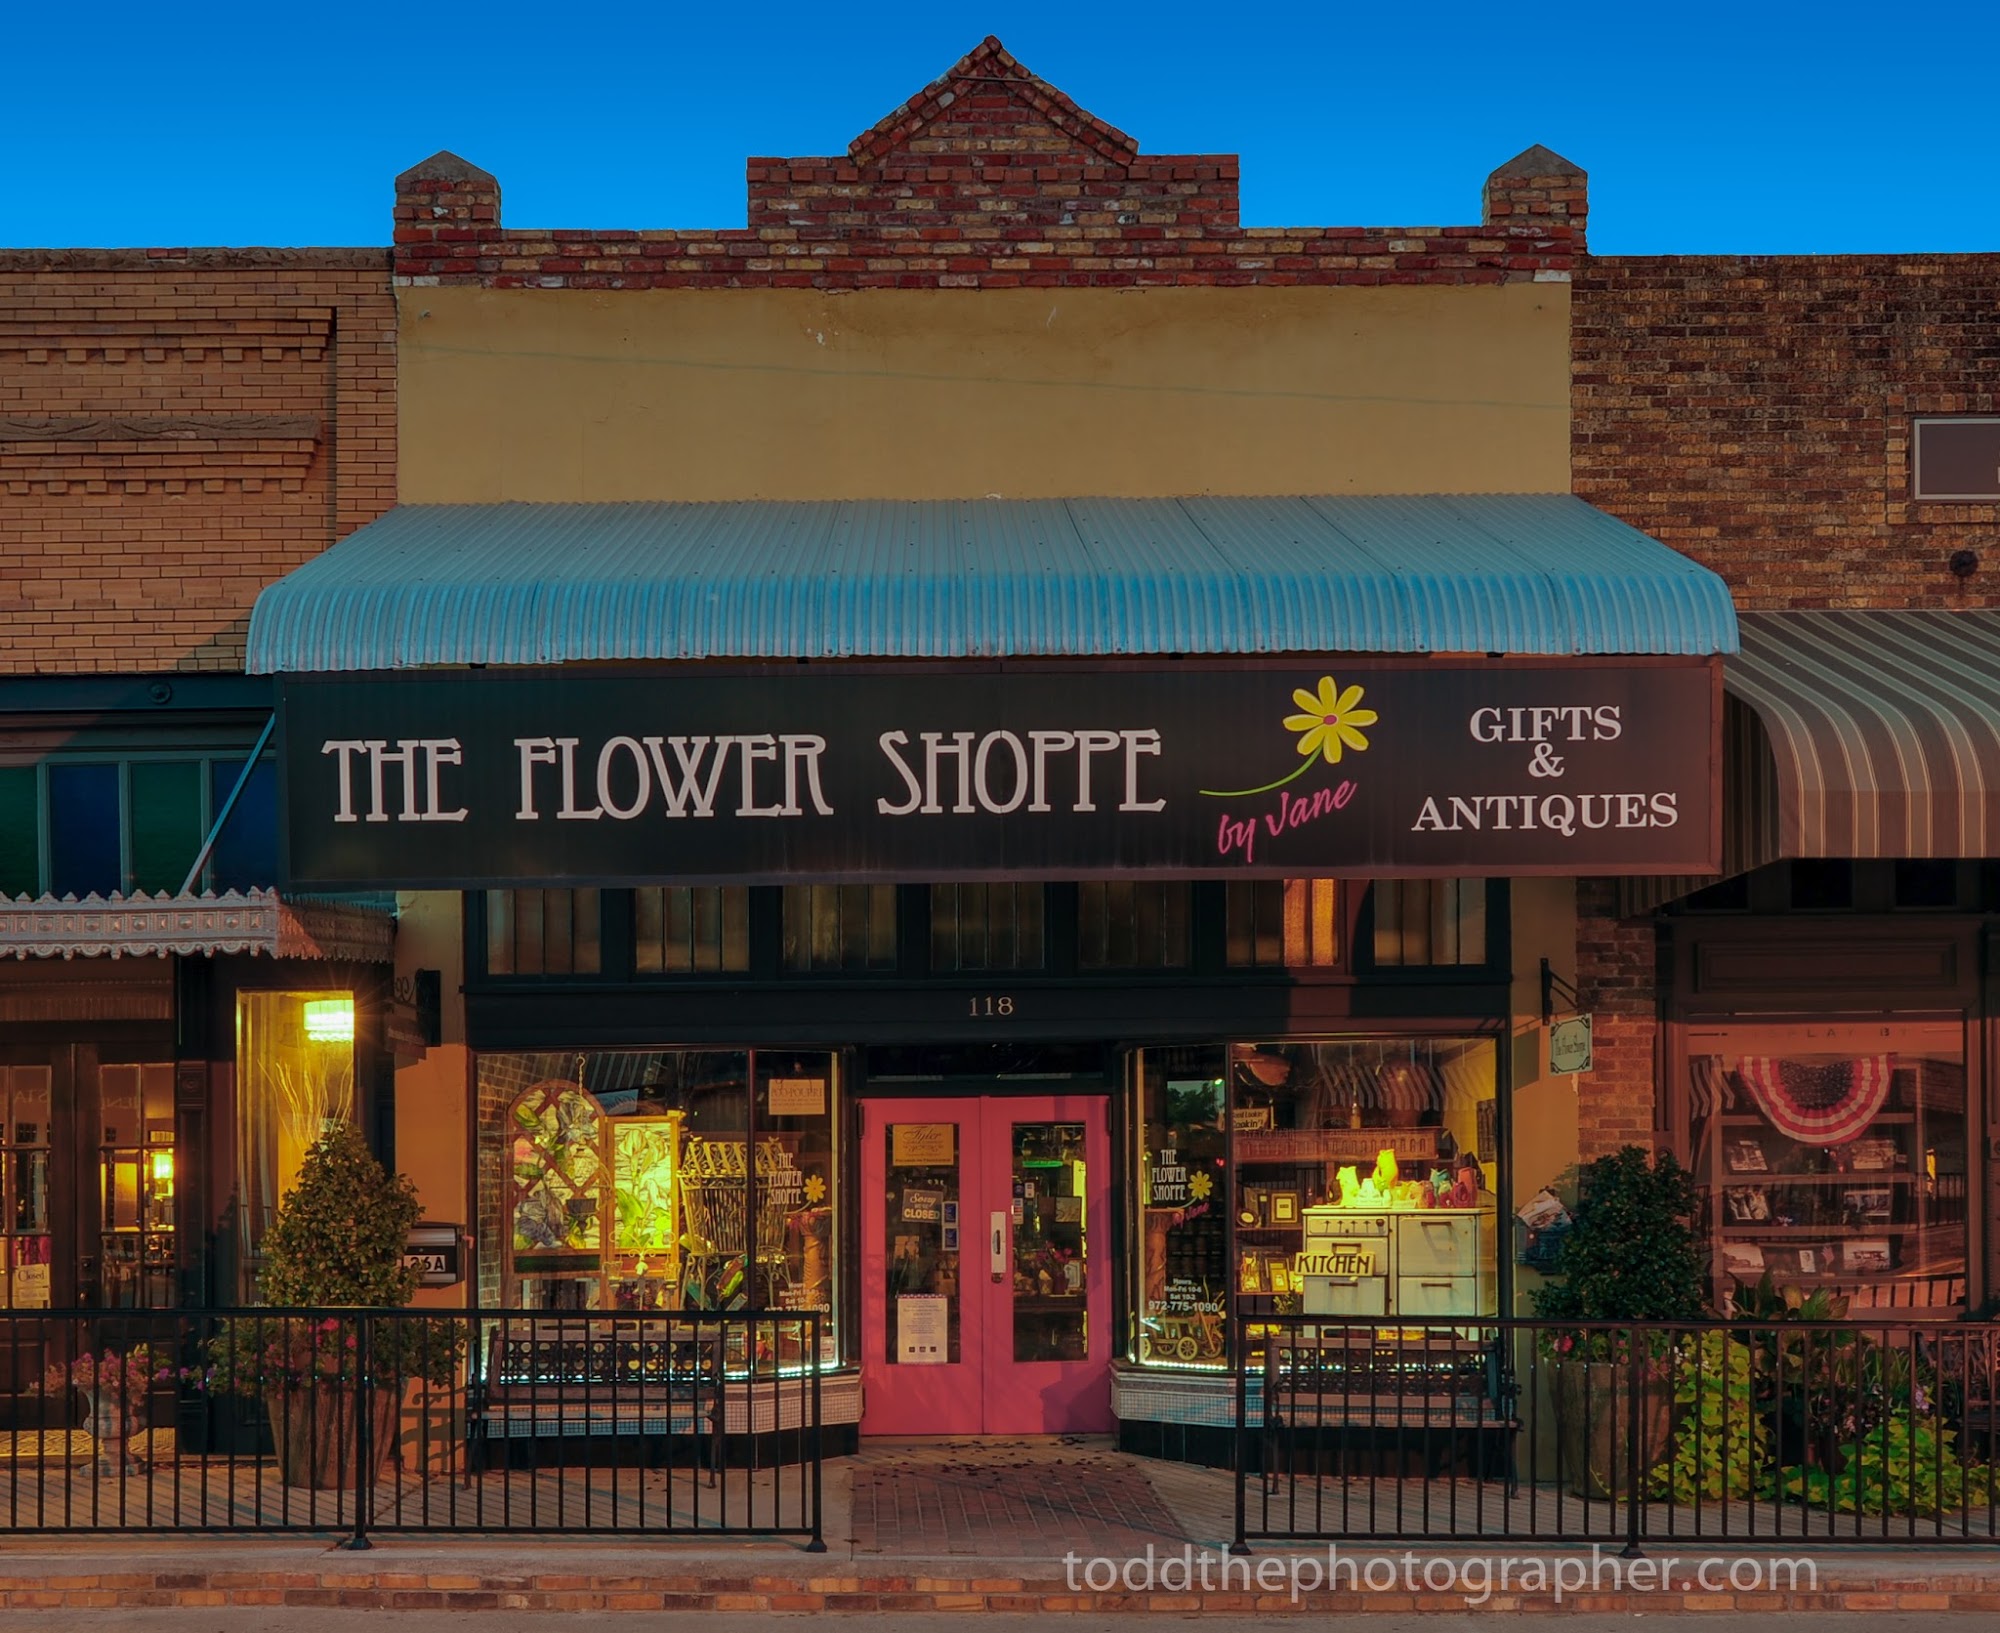 The Flower Shoppe by Jane